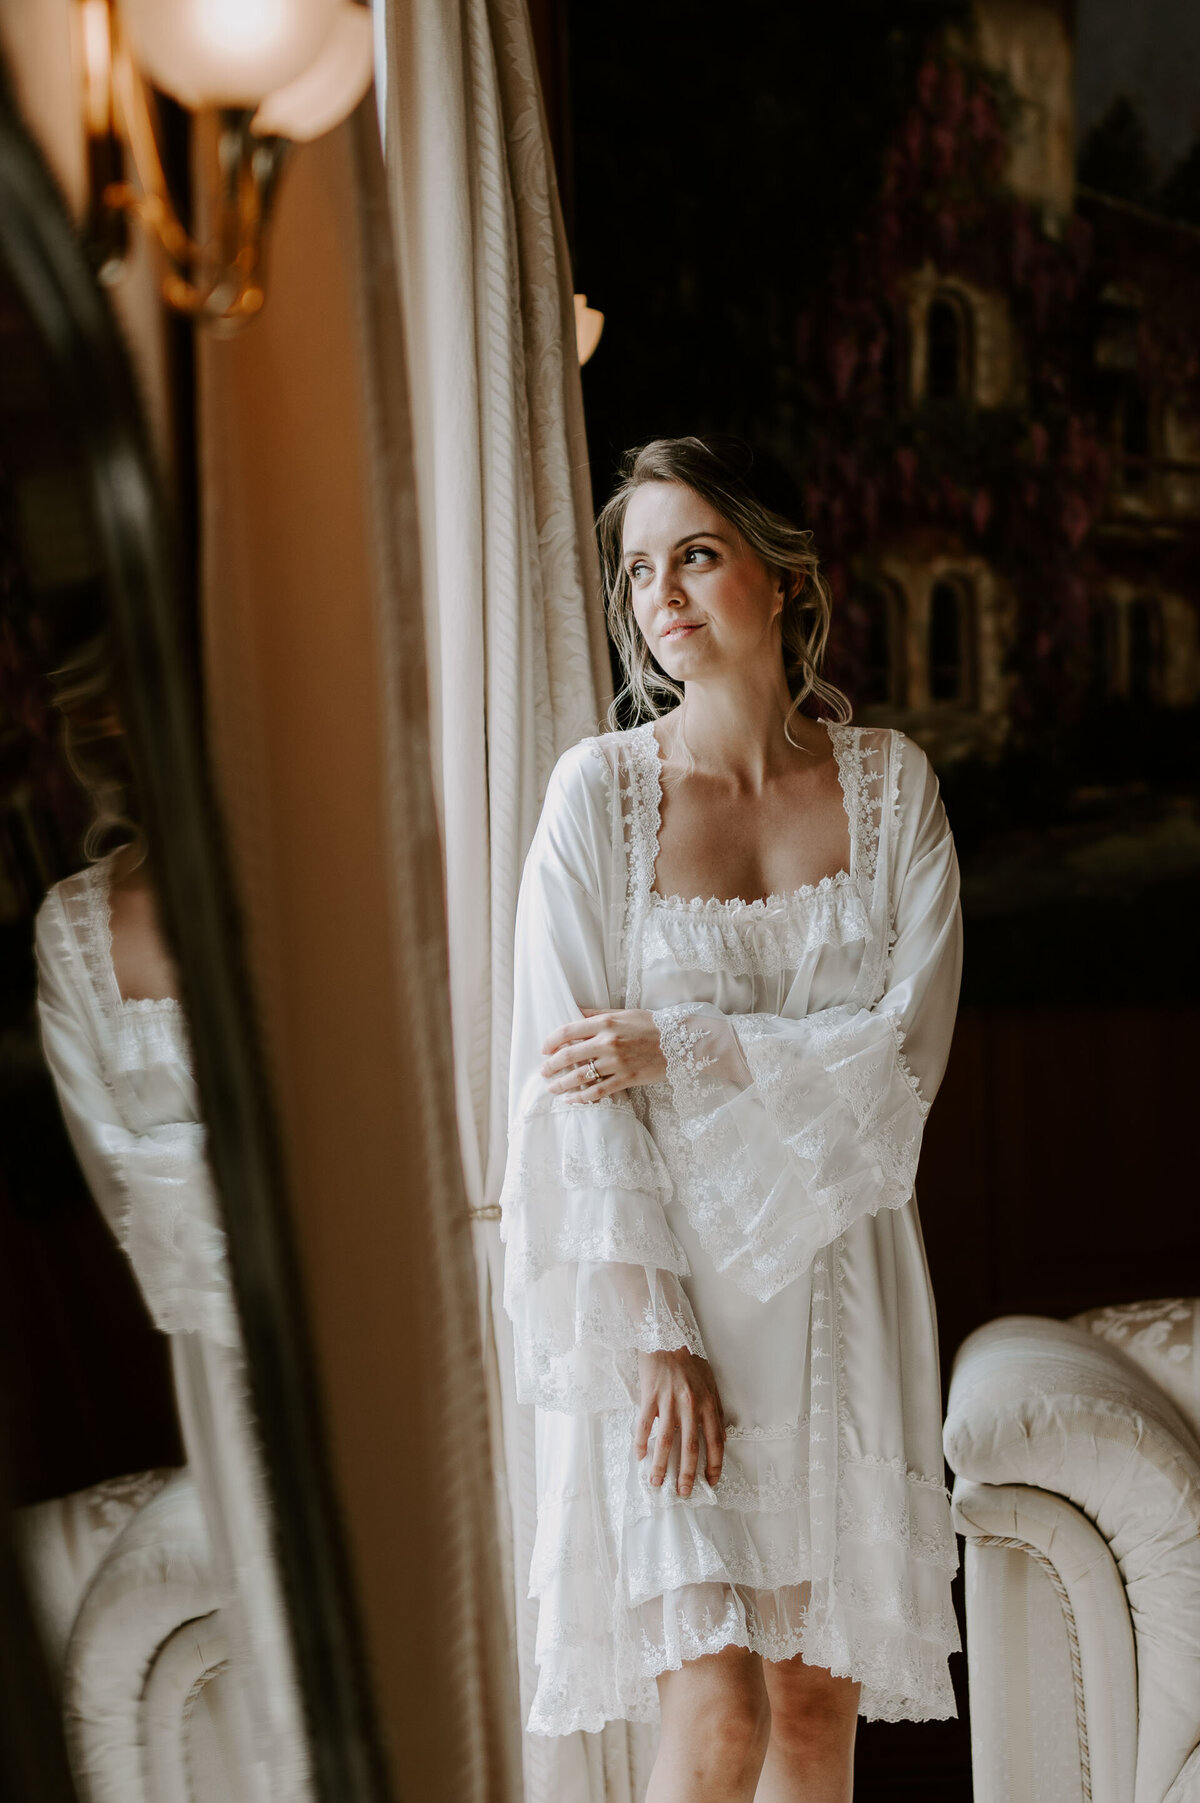 Waresley Park Estate - Styled Shoot - Laura Williams Photography - 210